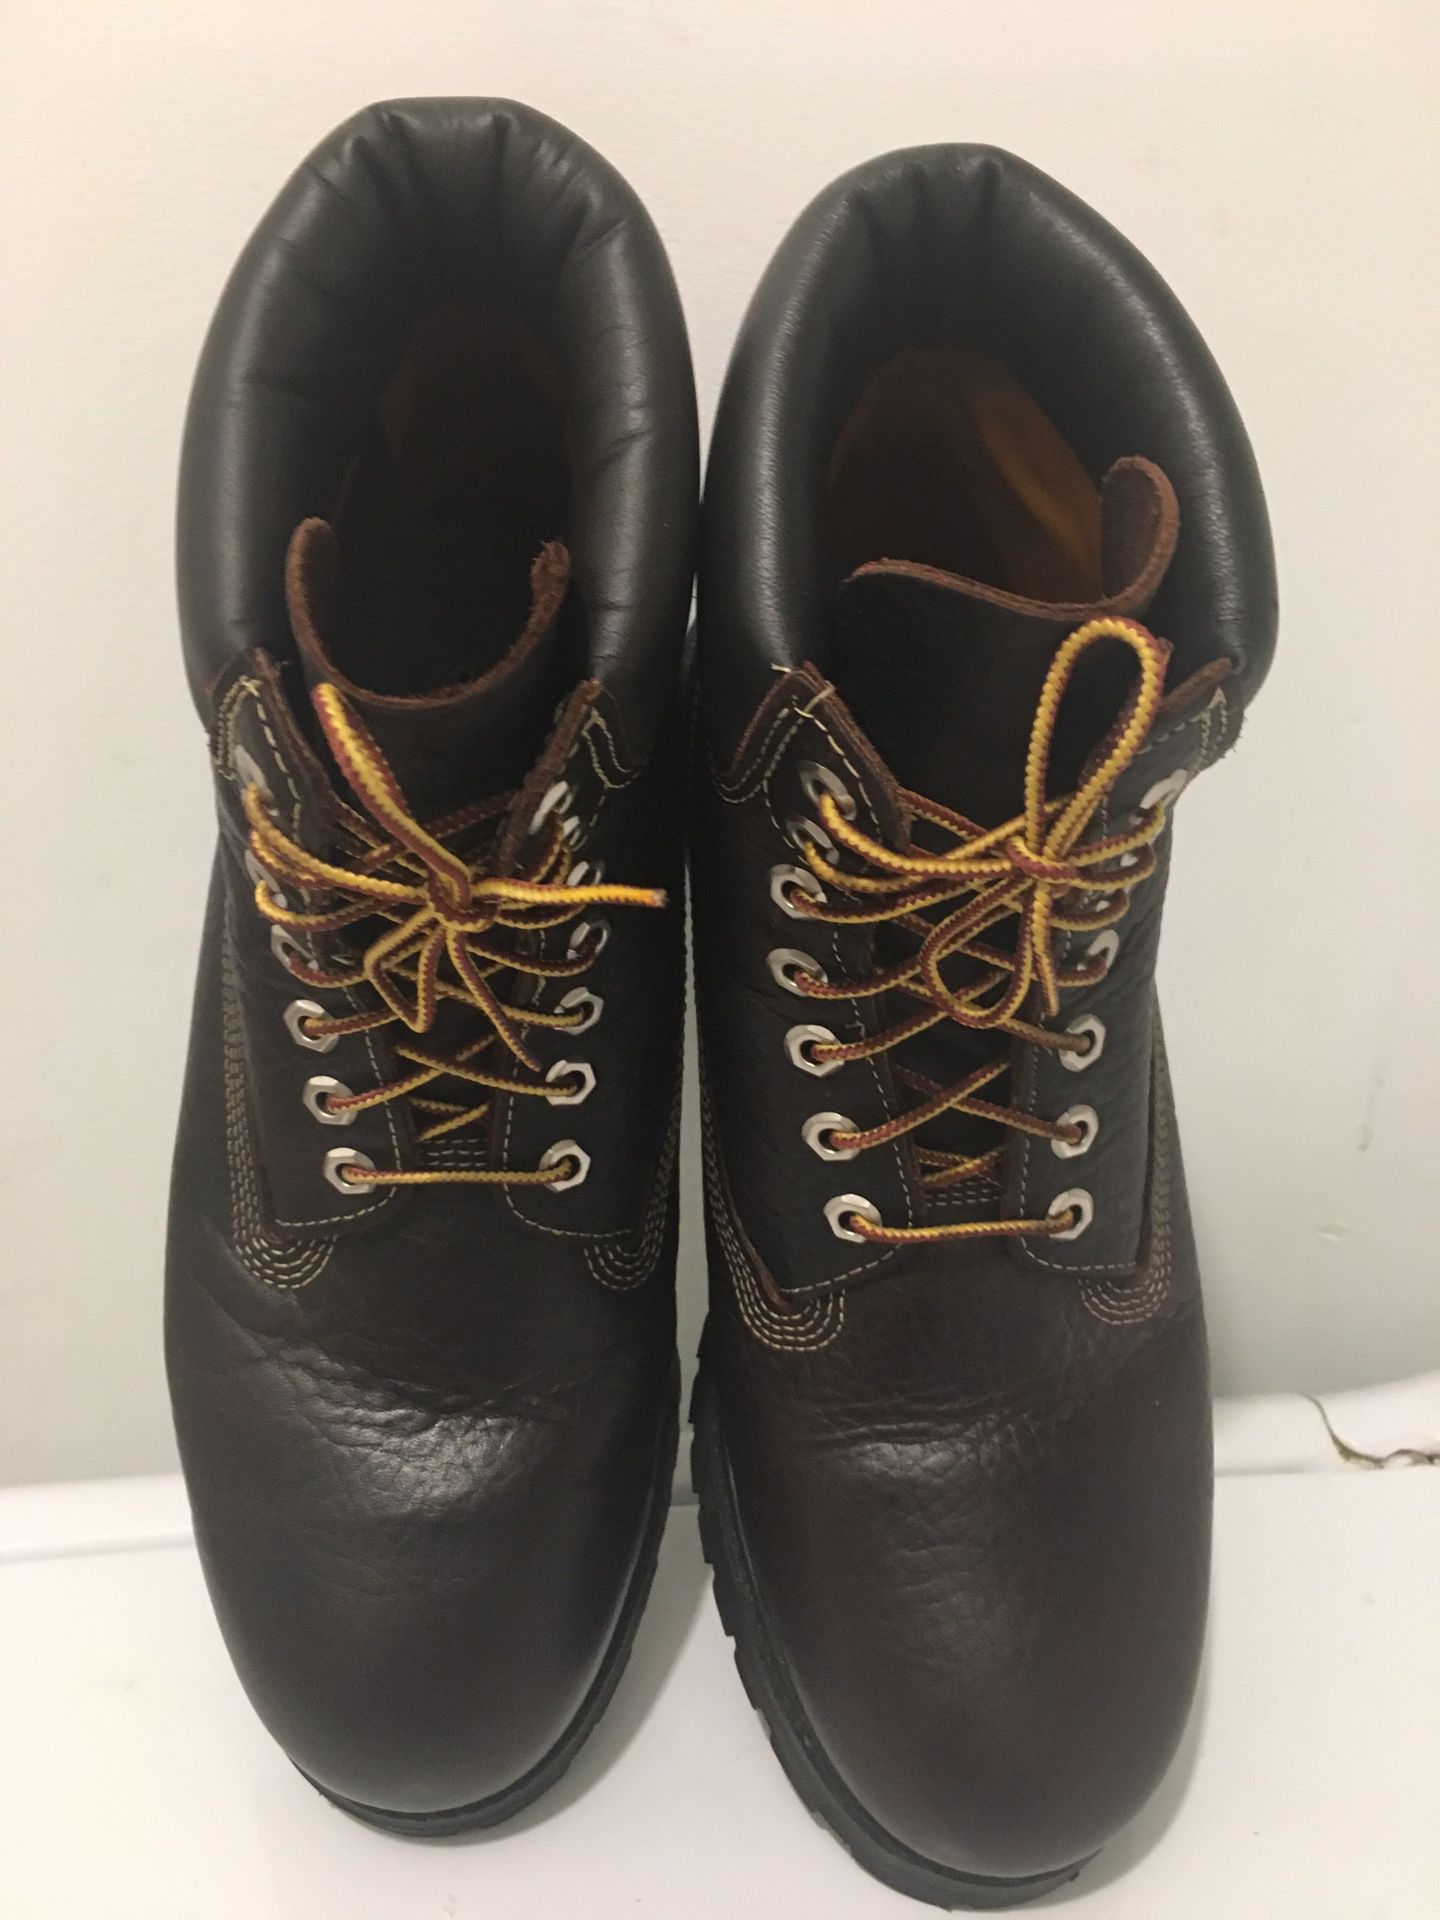 MENS TIMBERLAND BOOTS 11M